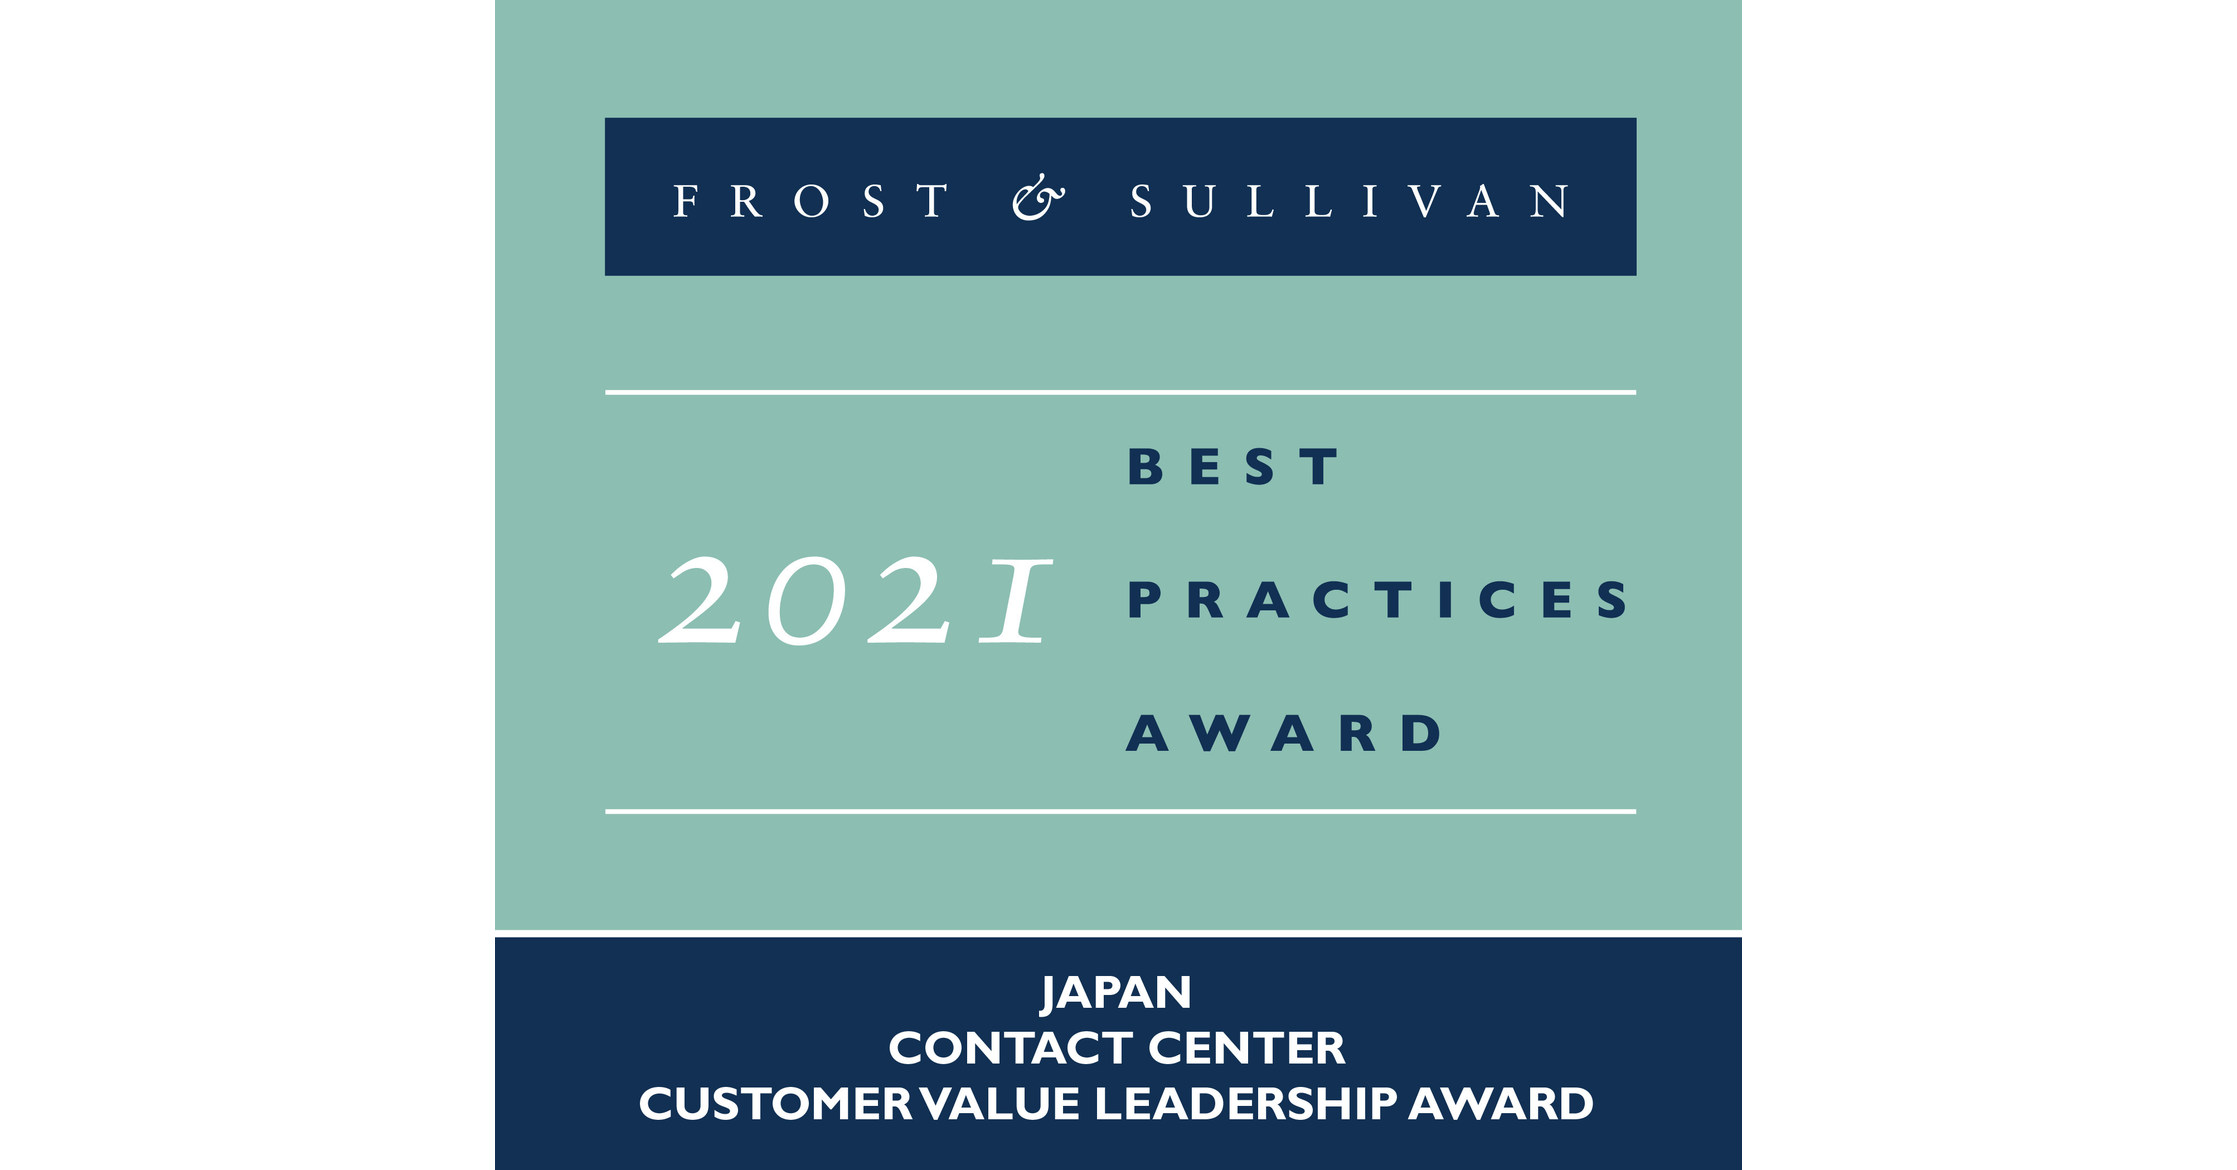 Rakuten Communications Lauded by Frost & Sullivan for Enhancing the Customer Experience with Its Versatile and Integrable "Rakuten Connect Storm" Platform